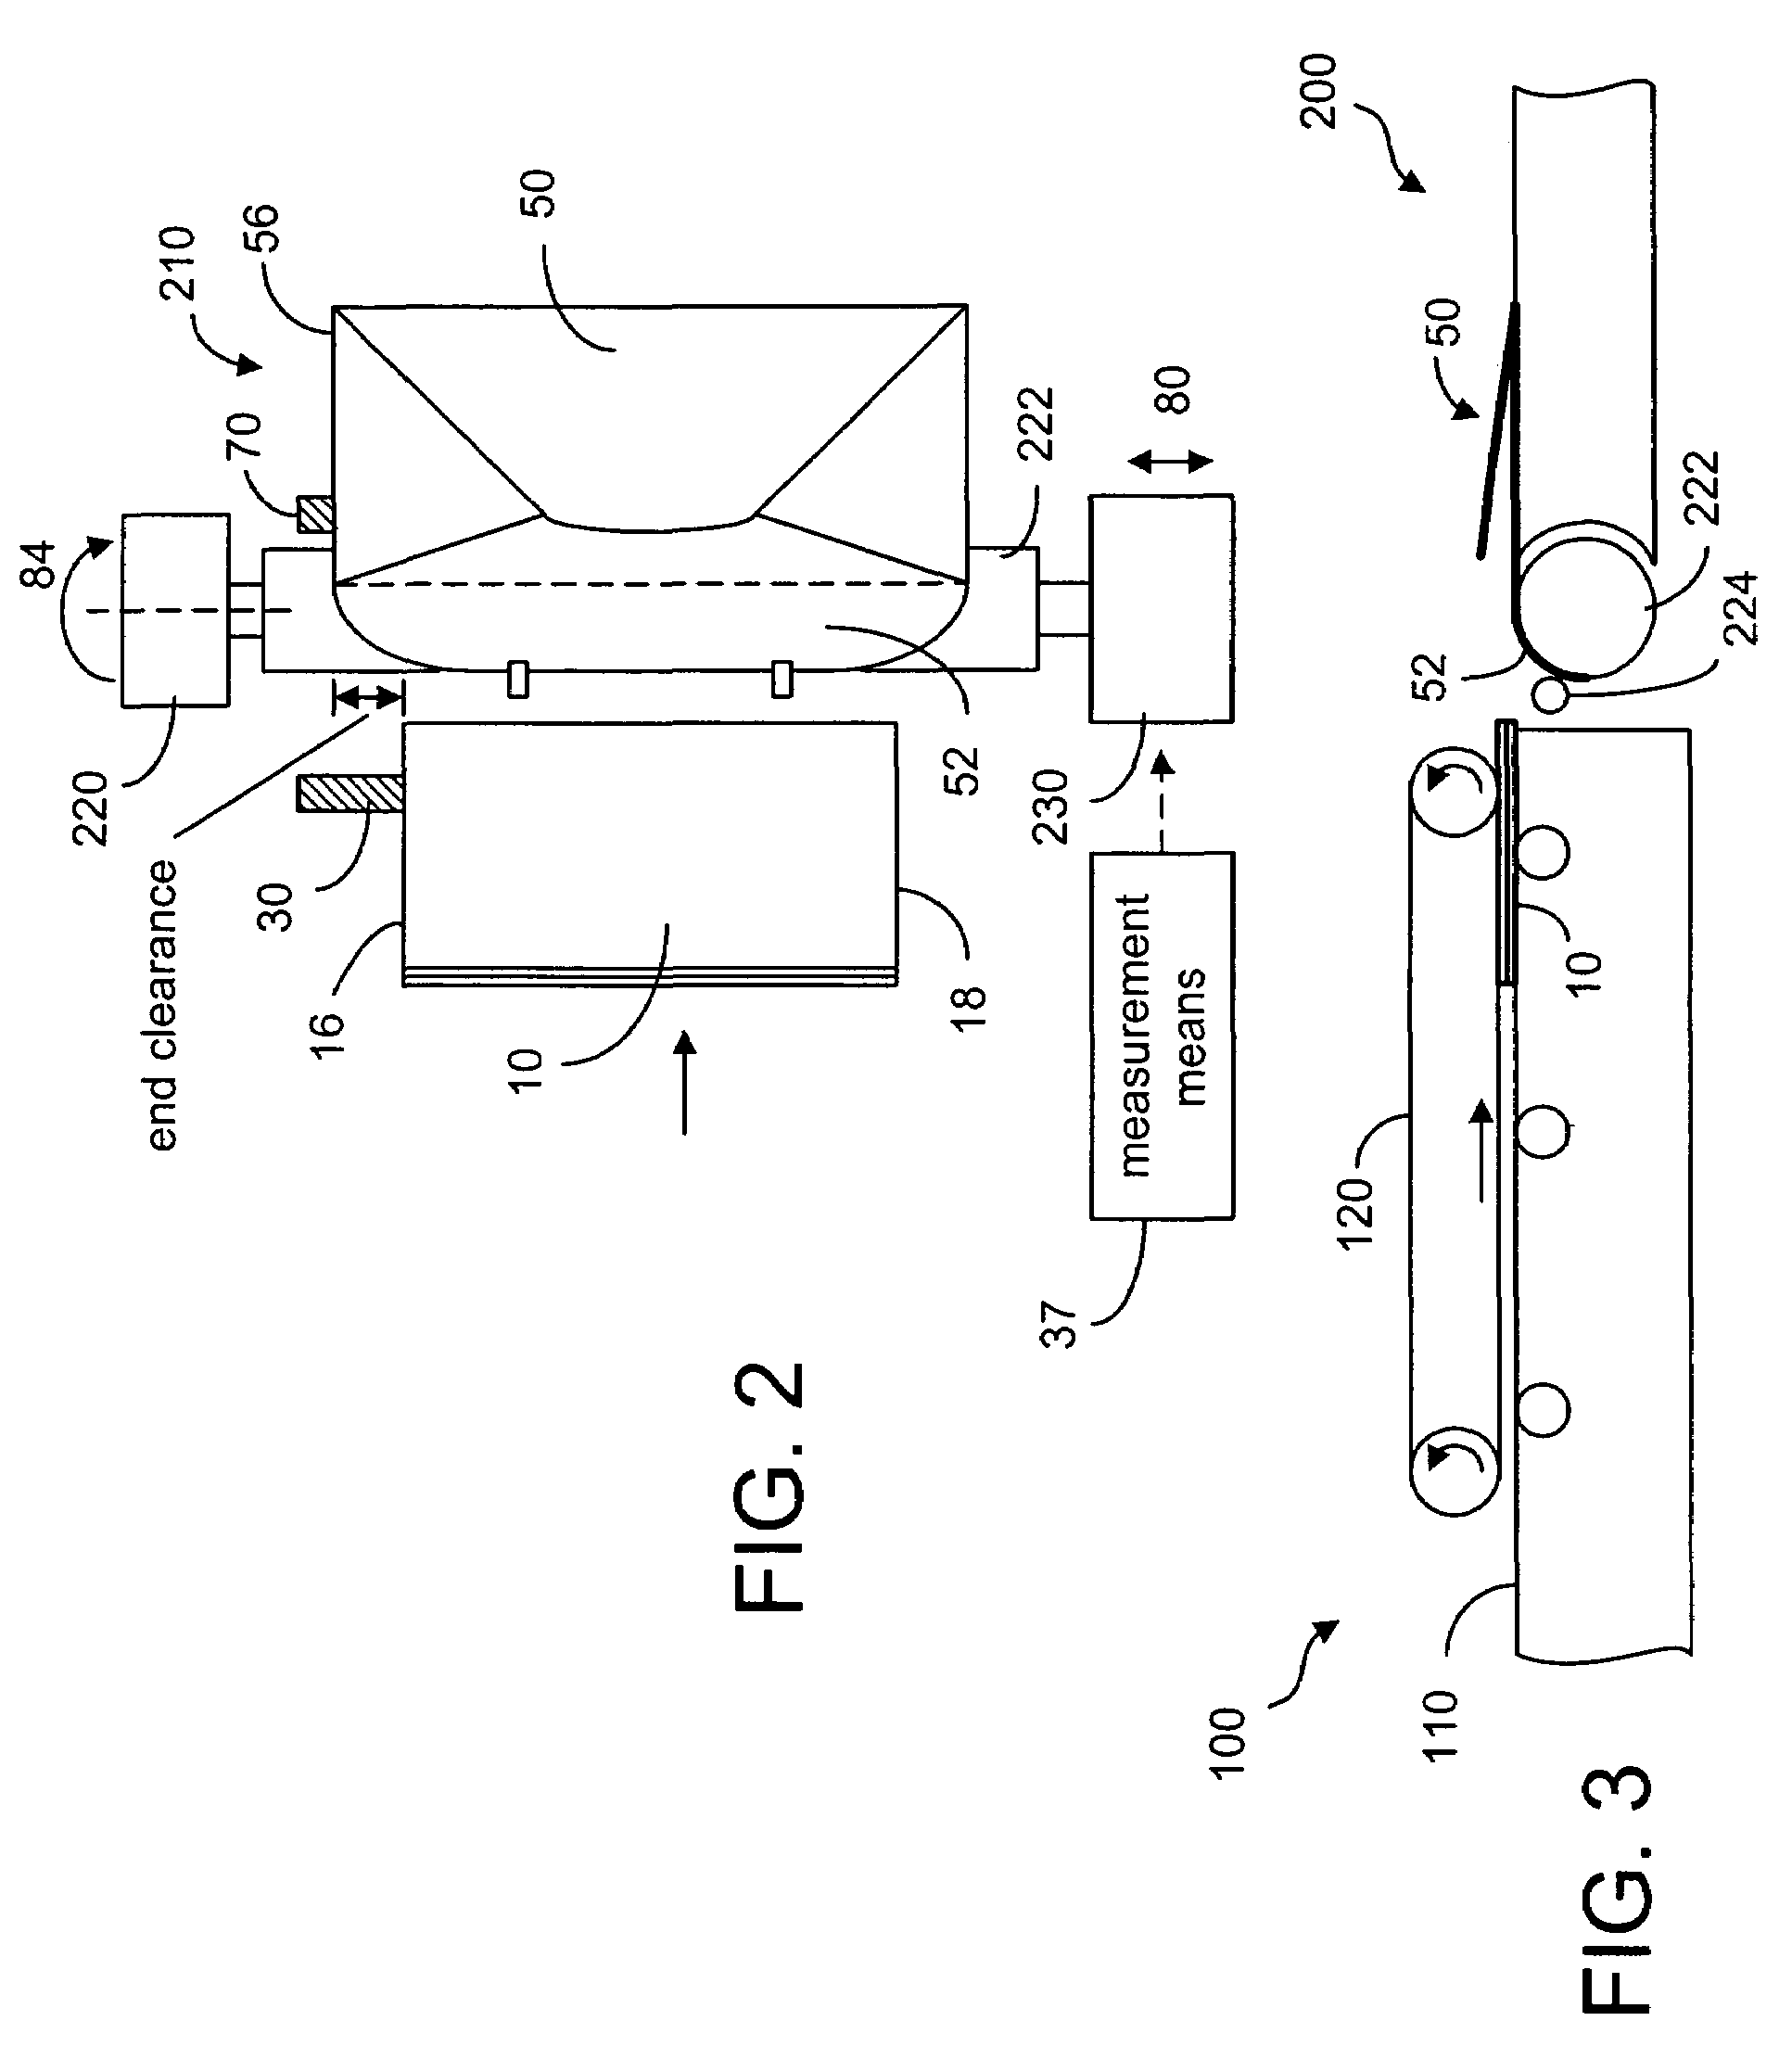 Method and device for aligning a receiving envelope in a mail inserter